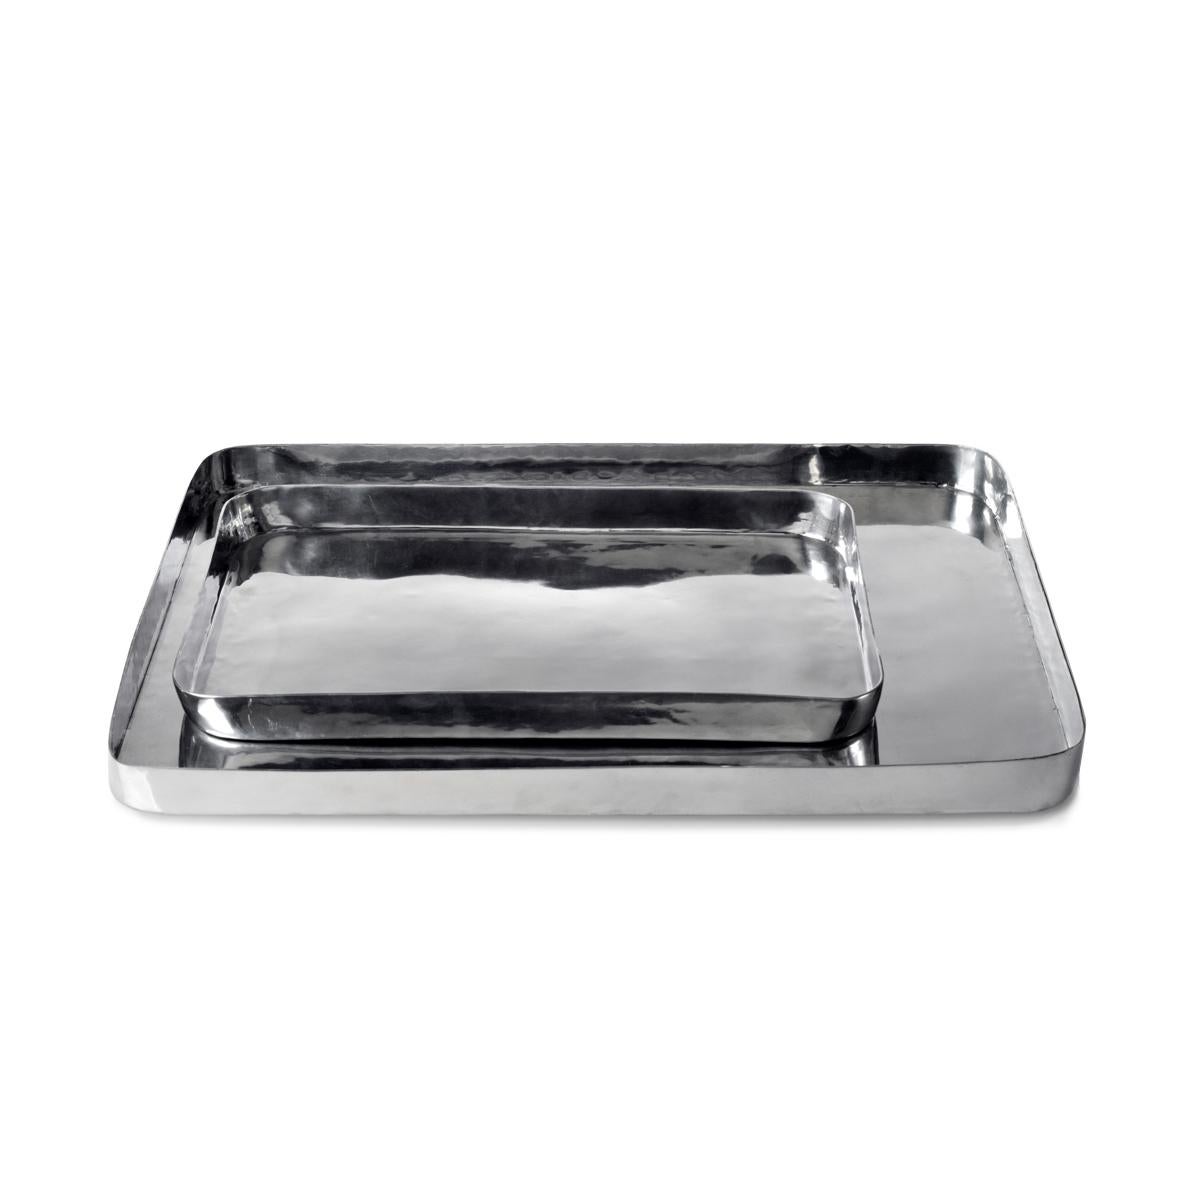 Masai is a family of rectangular polished metal trays designed by Aldo Cibic, available in two different sizes: small and large. The high edges and the rounded corner make this tray an handy object. The small one is perfect, for example, to serve